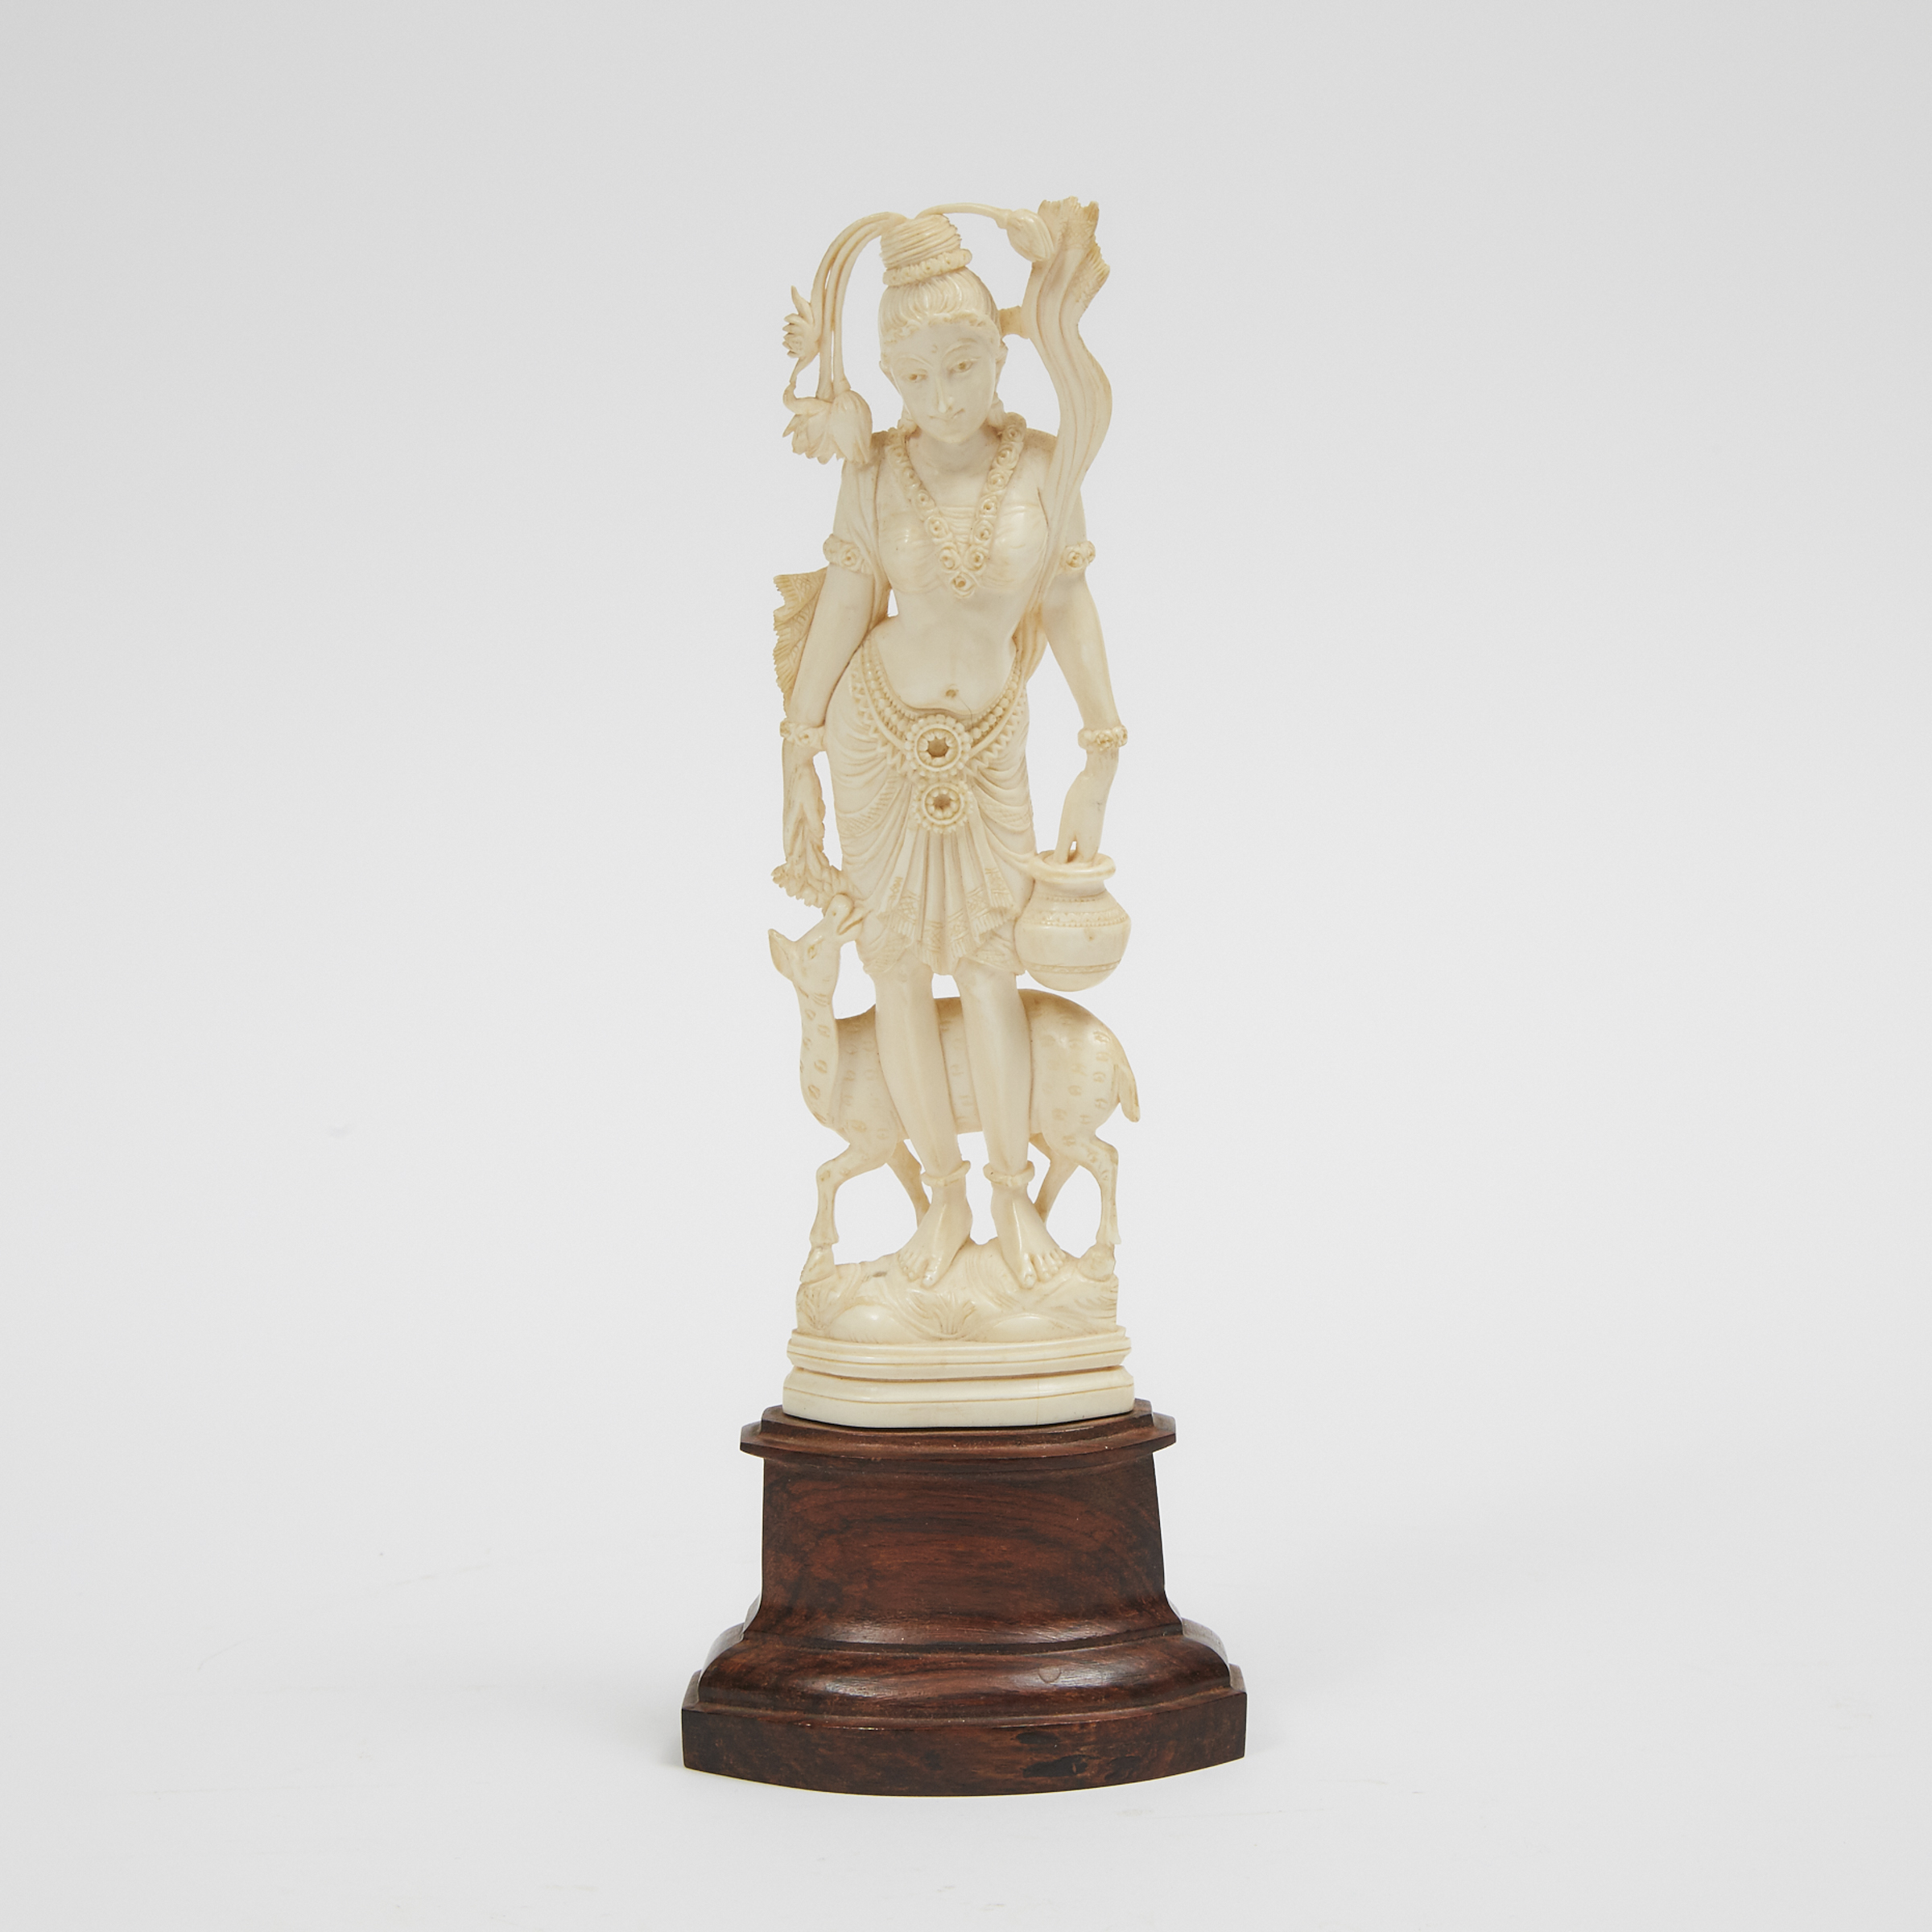 A Finely Carved Ivory Figure of Hindu Goddess with Deer